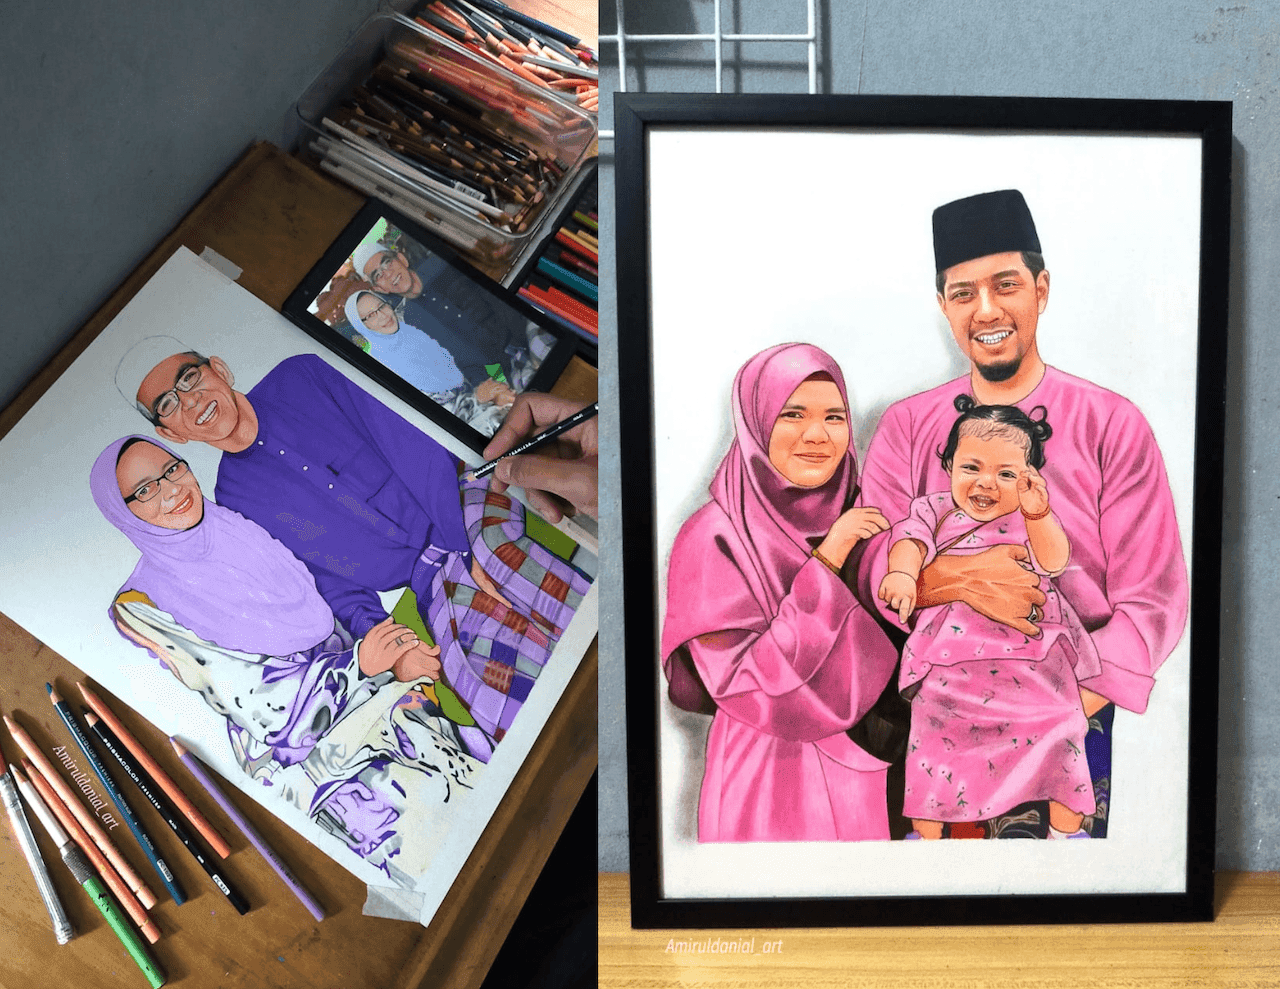 Amirul Danial works in his room, turning photographs of families into paintings for Hari Raya. Photo: Instagram
